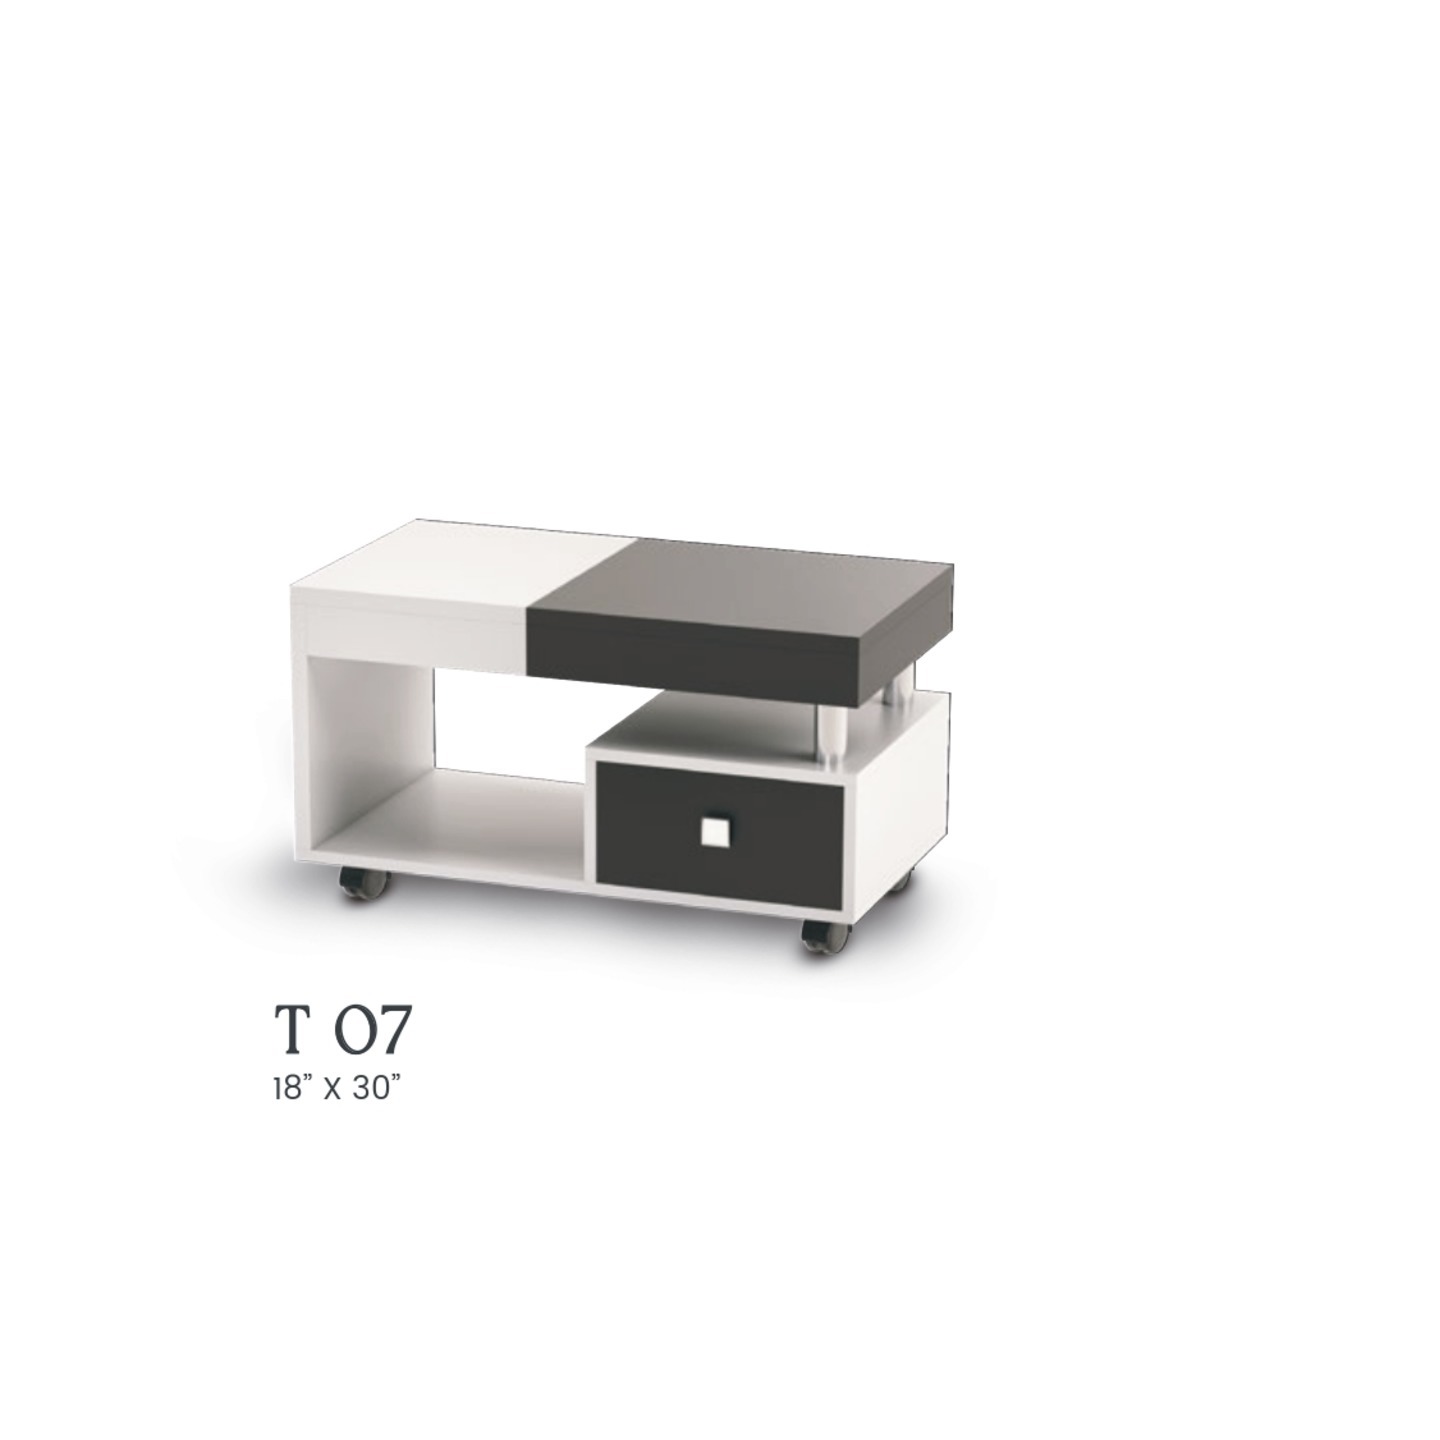 RLF Center Table T-07 With 1 Drawer In Black & White Colour